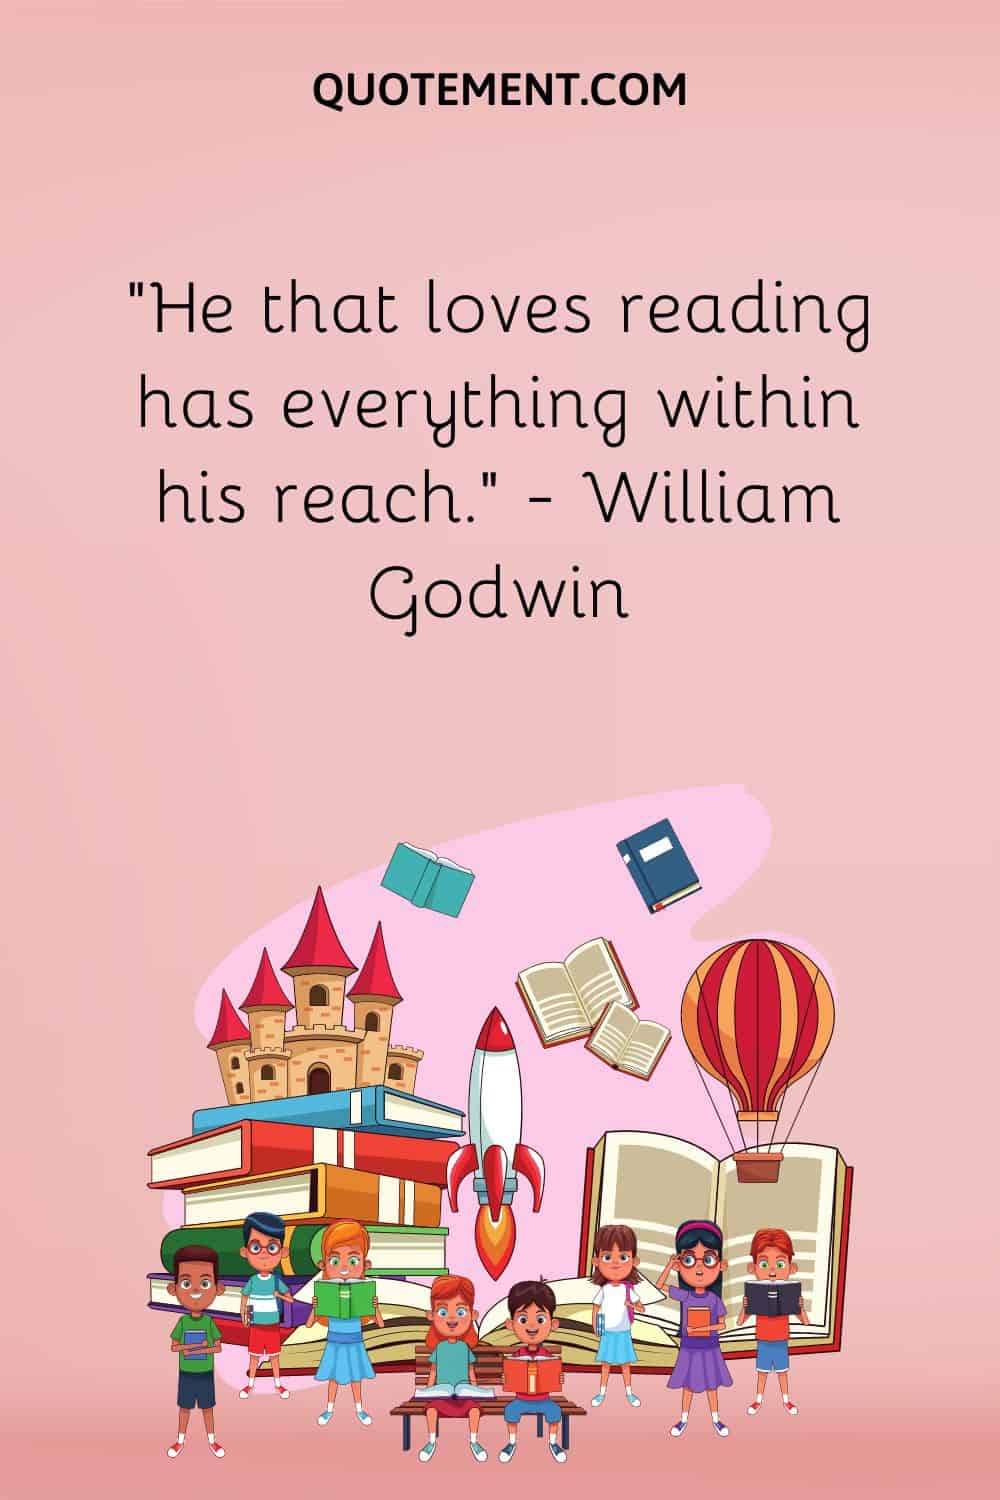 “He that loves reading has everything within his reach.” — William Godwin